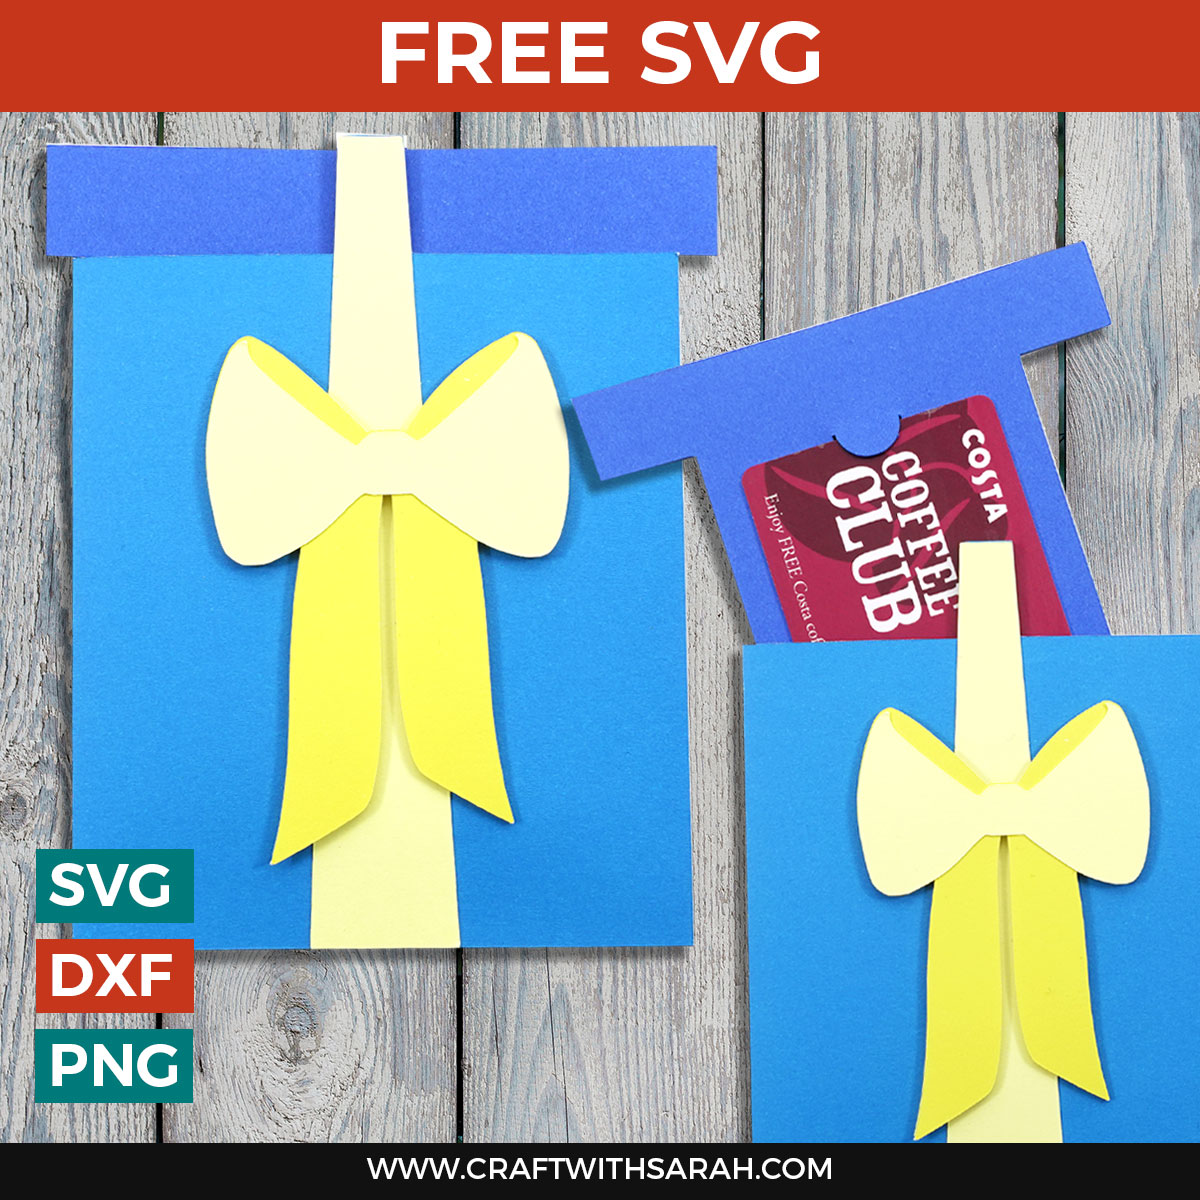 Easy Cricut Gift Card Holders with FREE SVG!